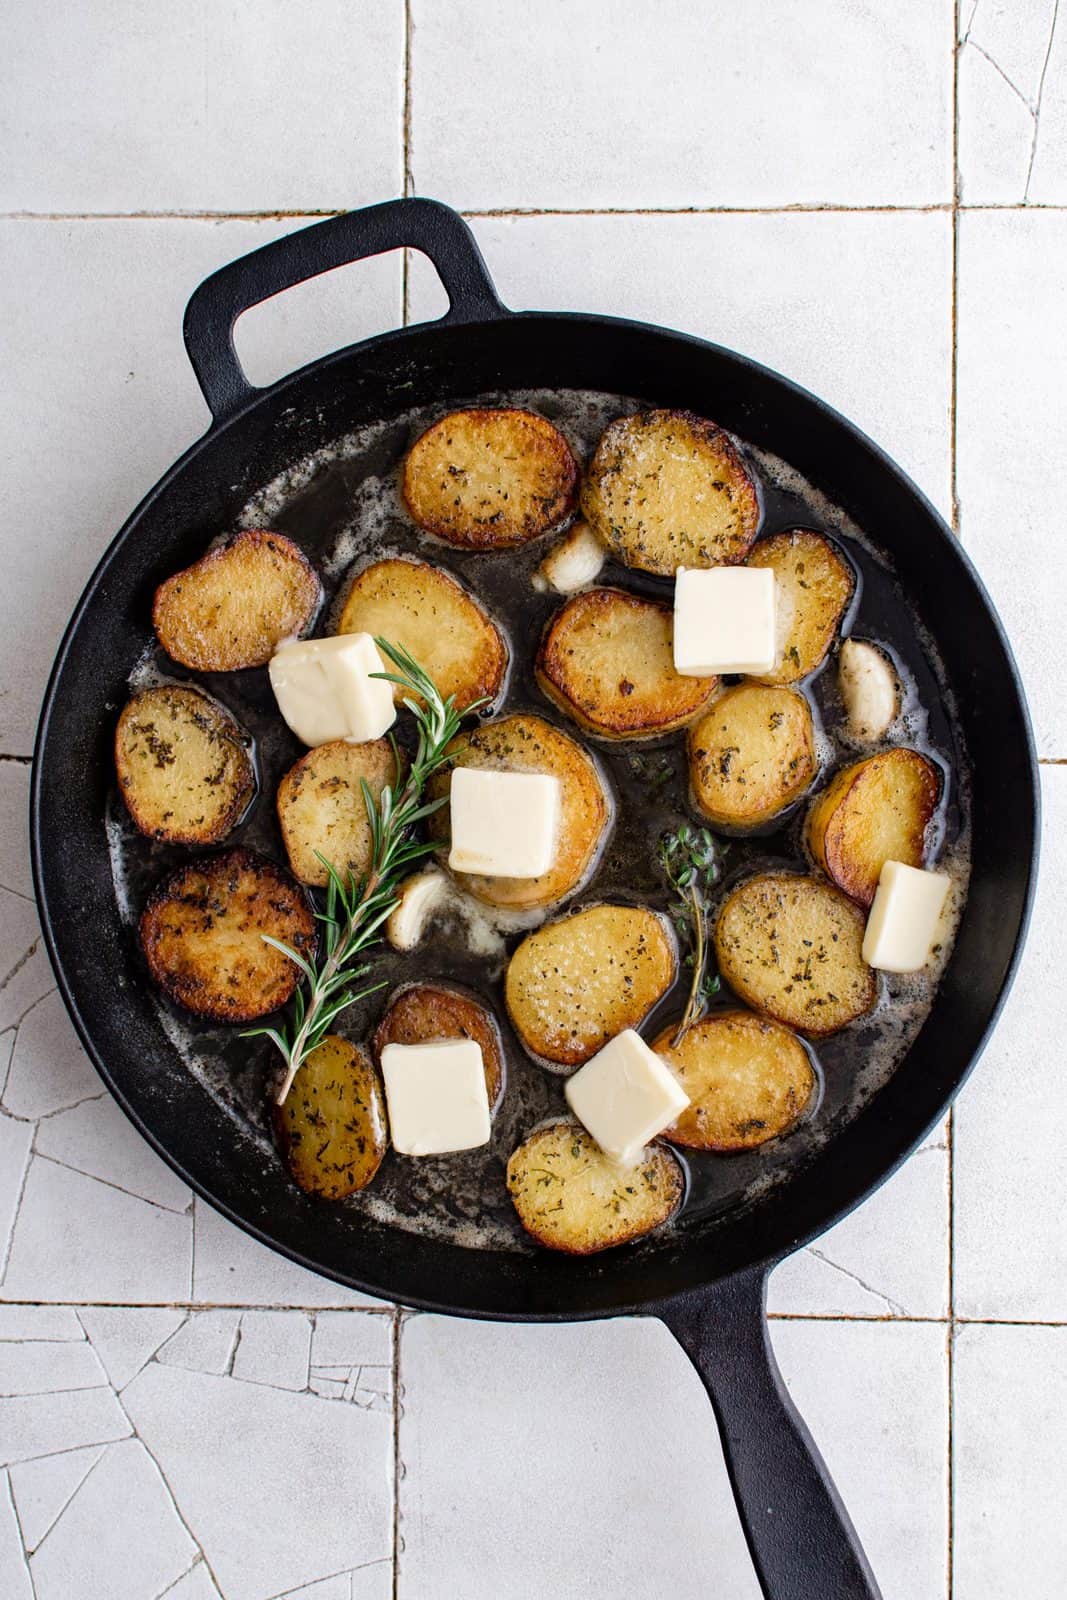 Slices of butter added to top of potatoes in pan.